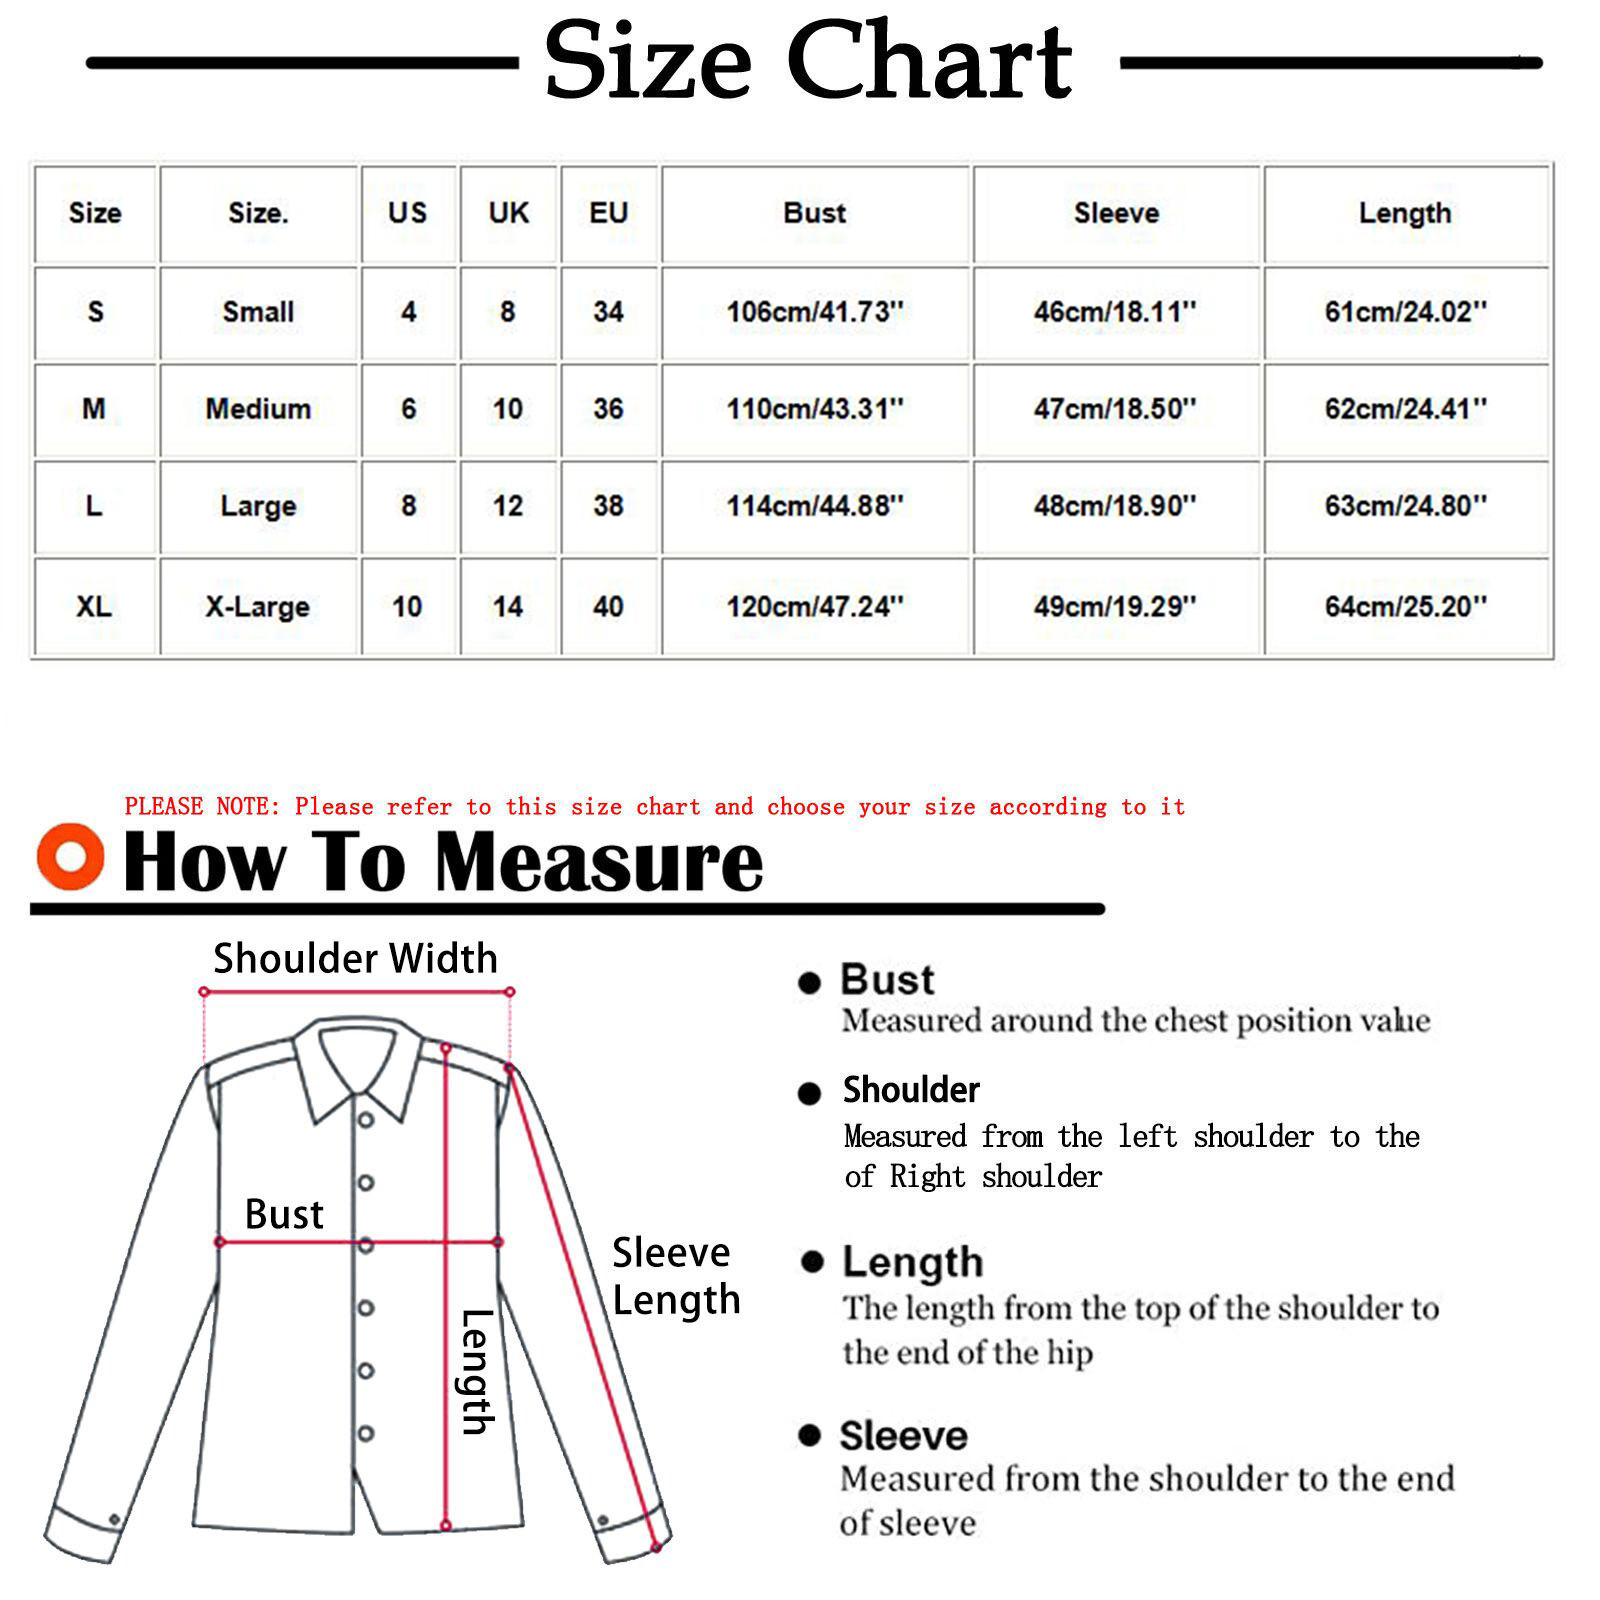 YFPWM Winter Sweaters for Women 2022 Plus Size Knitted Sweatshirt Mid-Length Belted Overcoat Hooded Collar Lambswoo Outerwear Denim Jacket Sport Coat Windproof Classic Overcoat - image 3 of 7